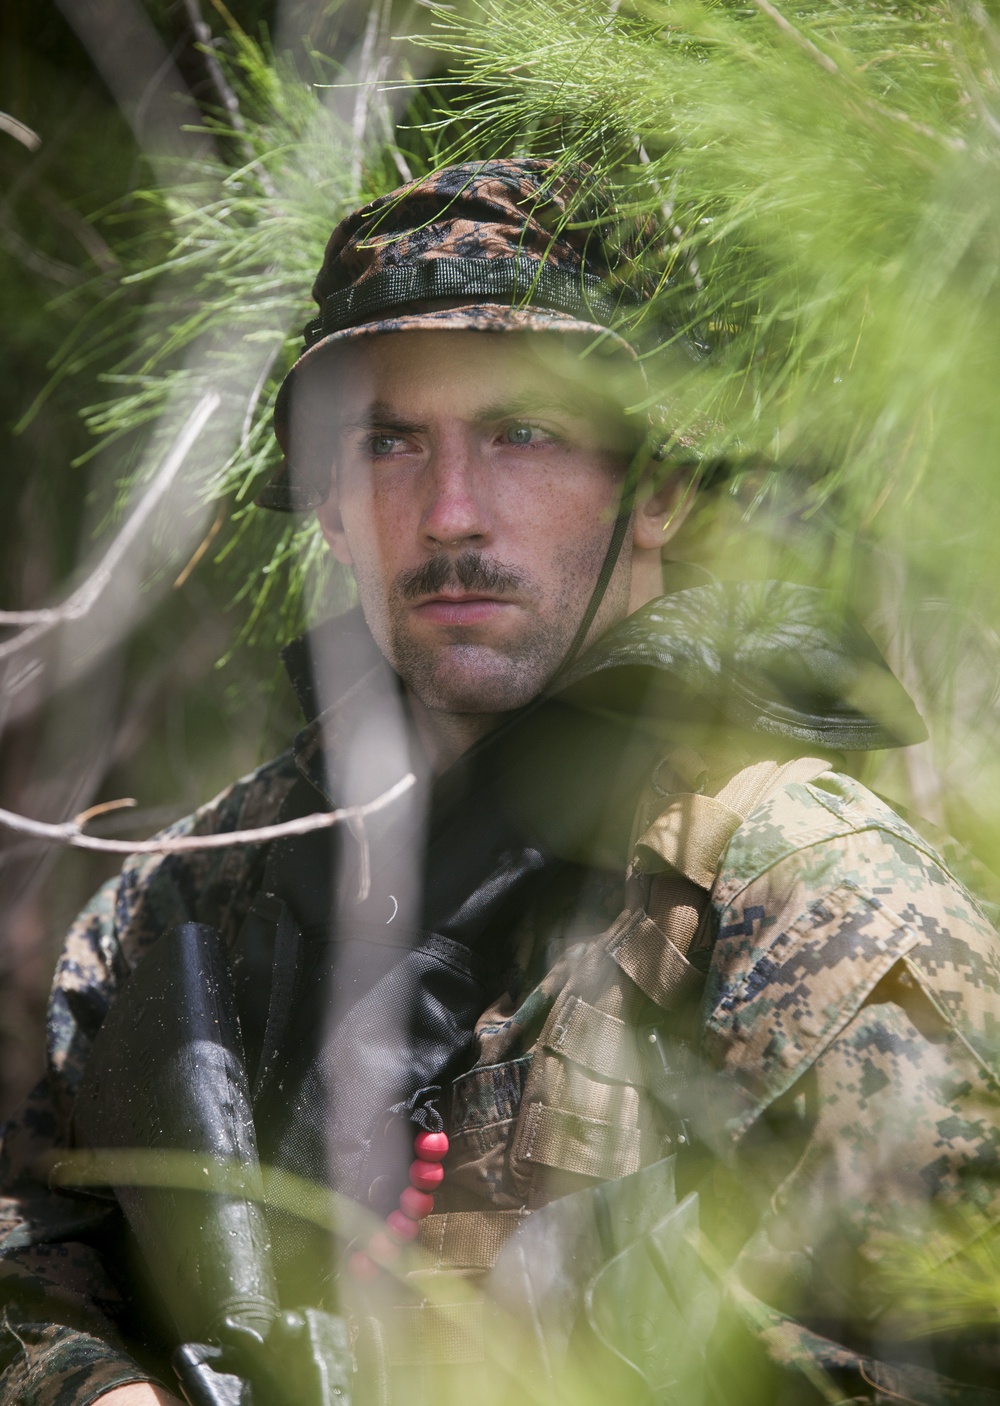 Radio Reconnaissance Operator’s Course trains amphibious warriors of the Pacific